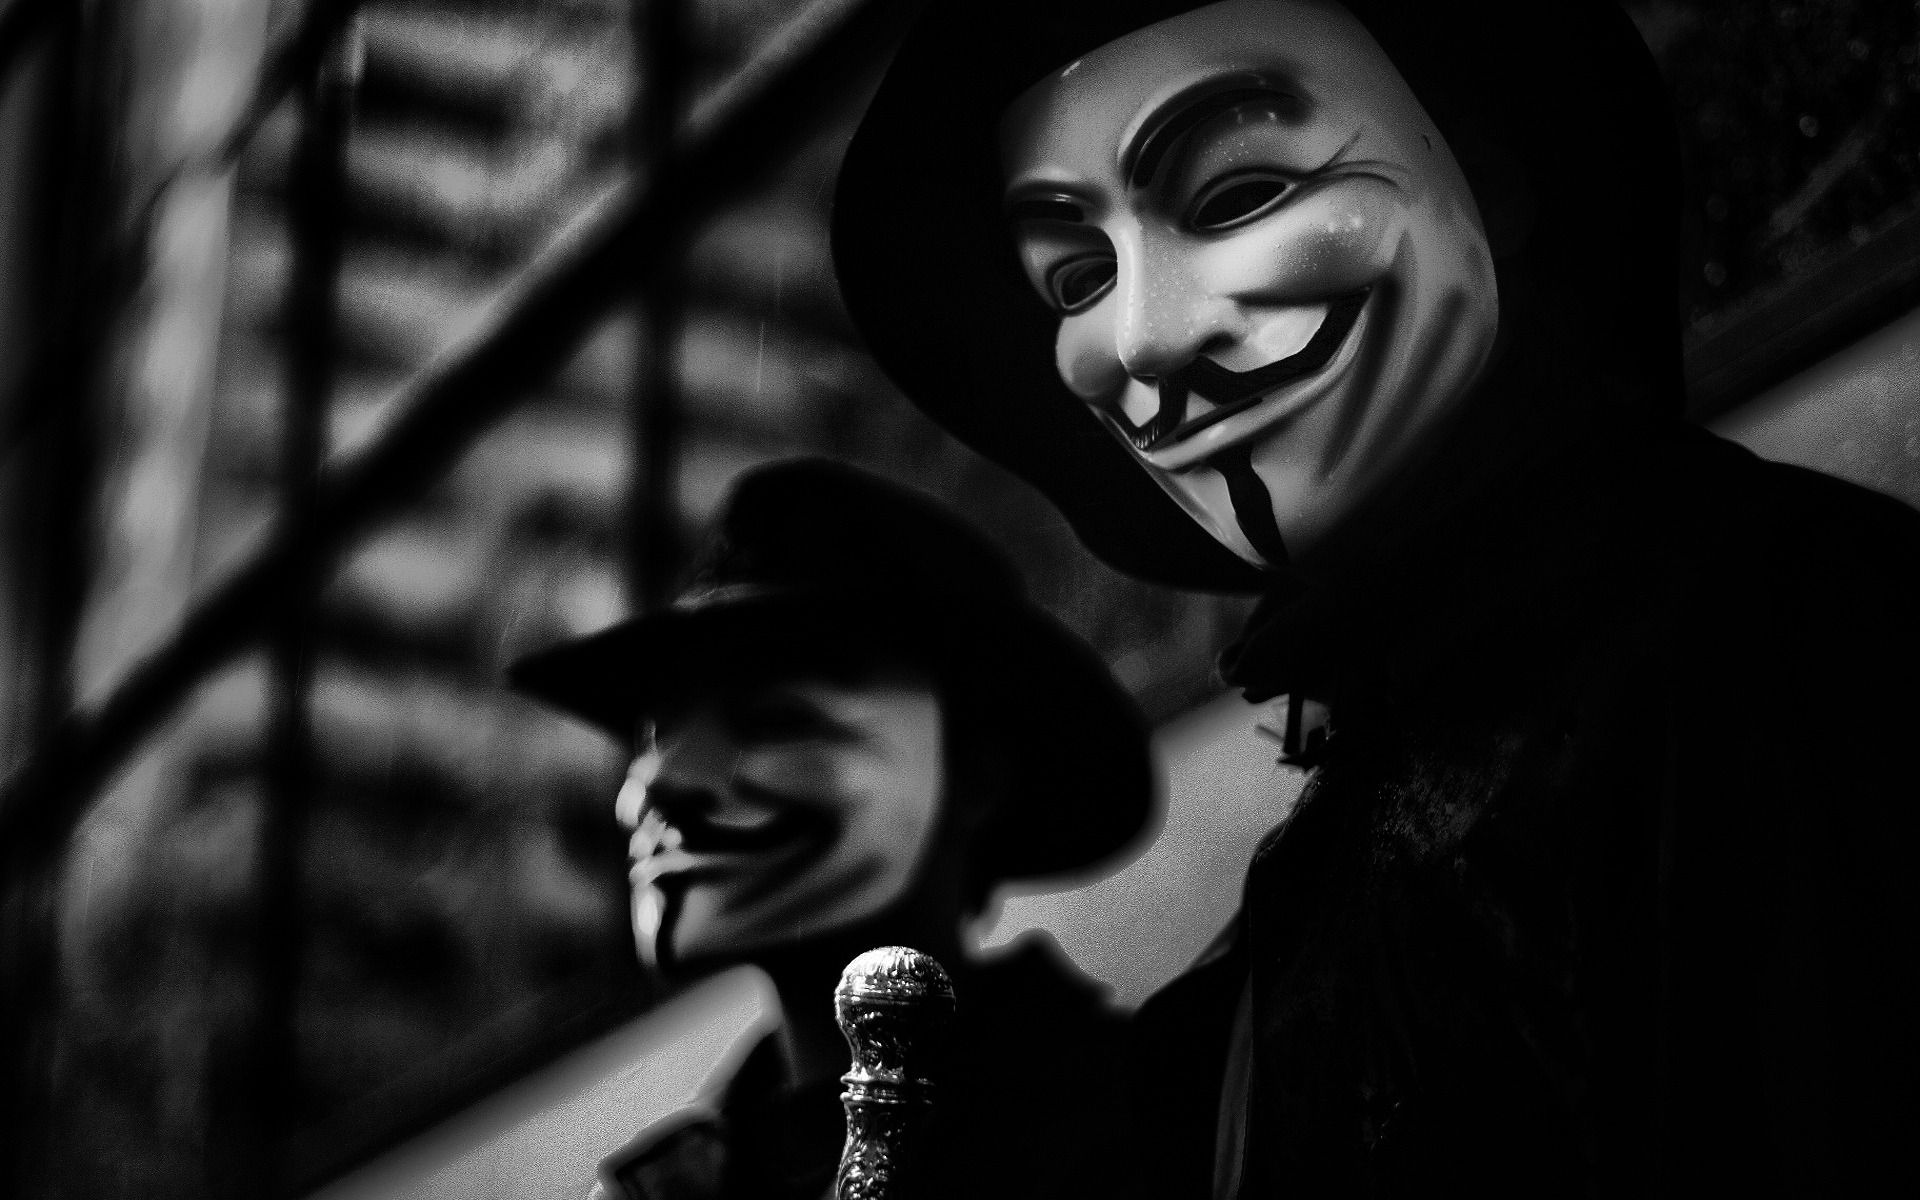 film V for Vendetta wallpapers and images - wallpapers, pictures ...